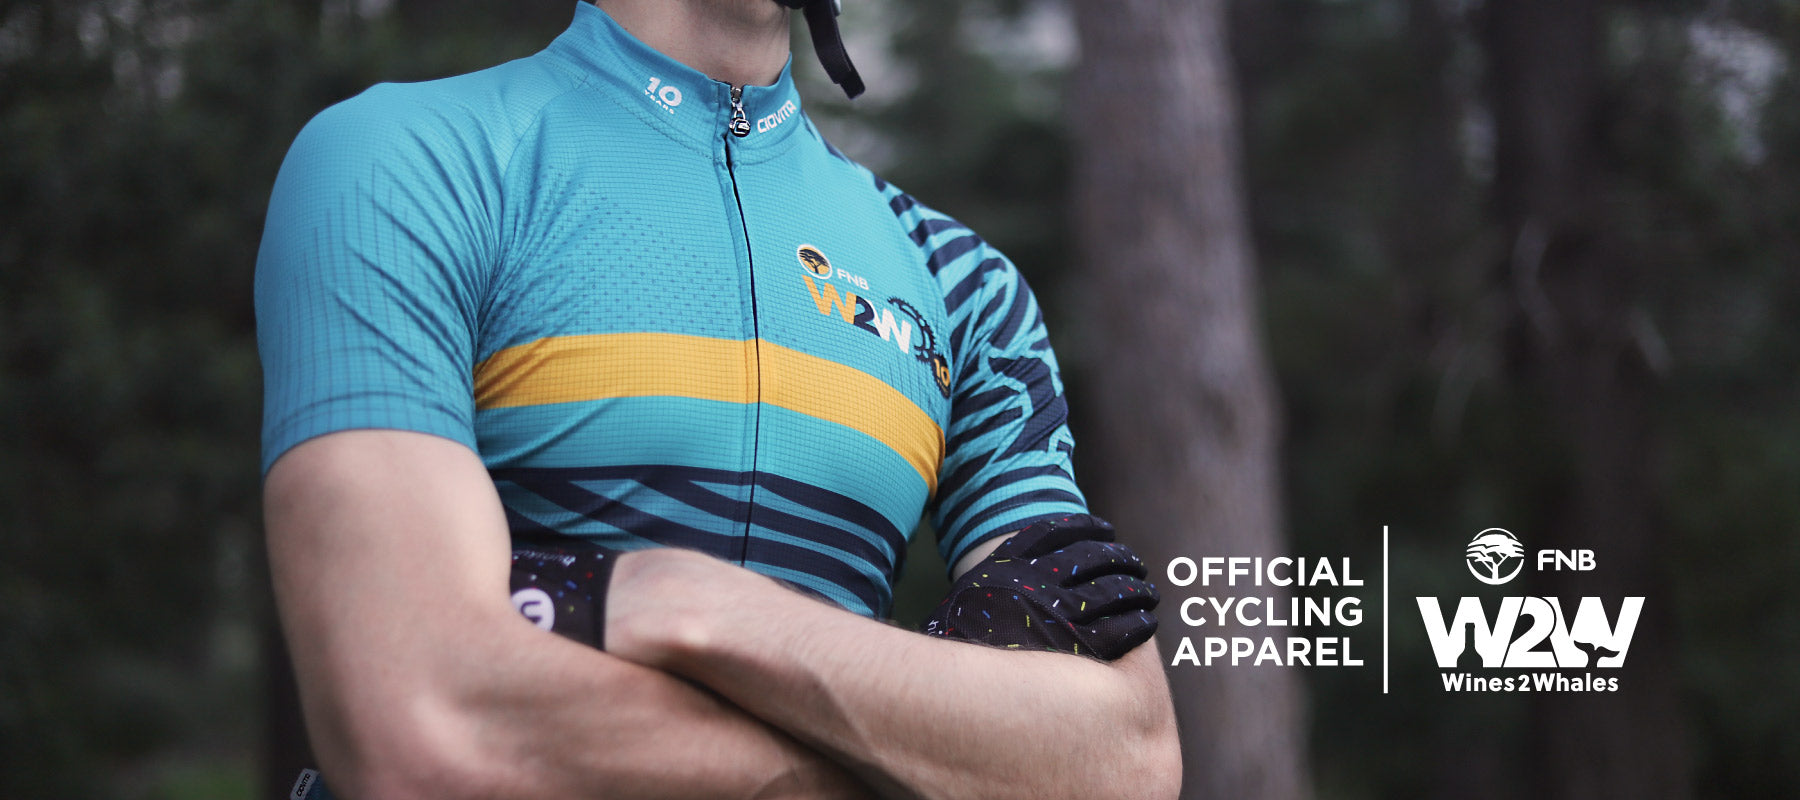 CUSTOM CYCLING KIT: Wines2Whales